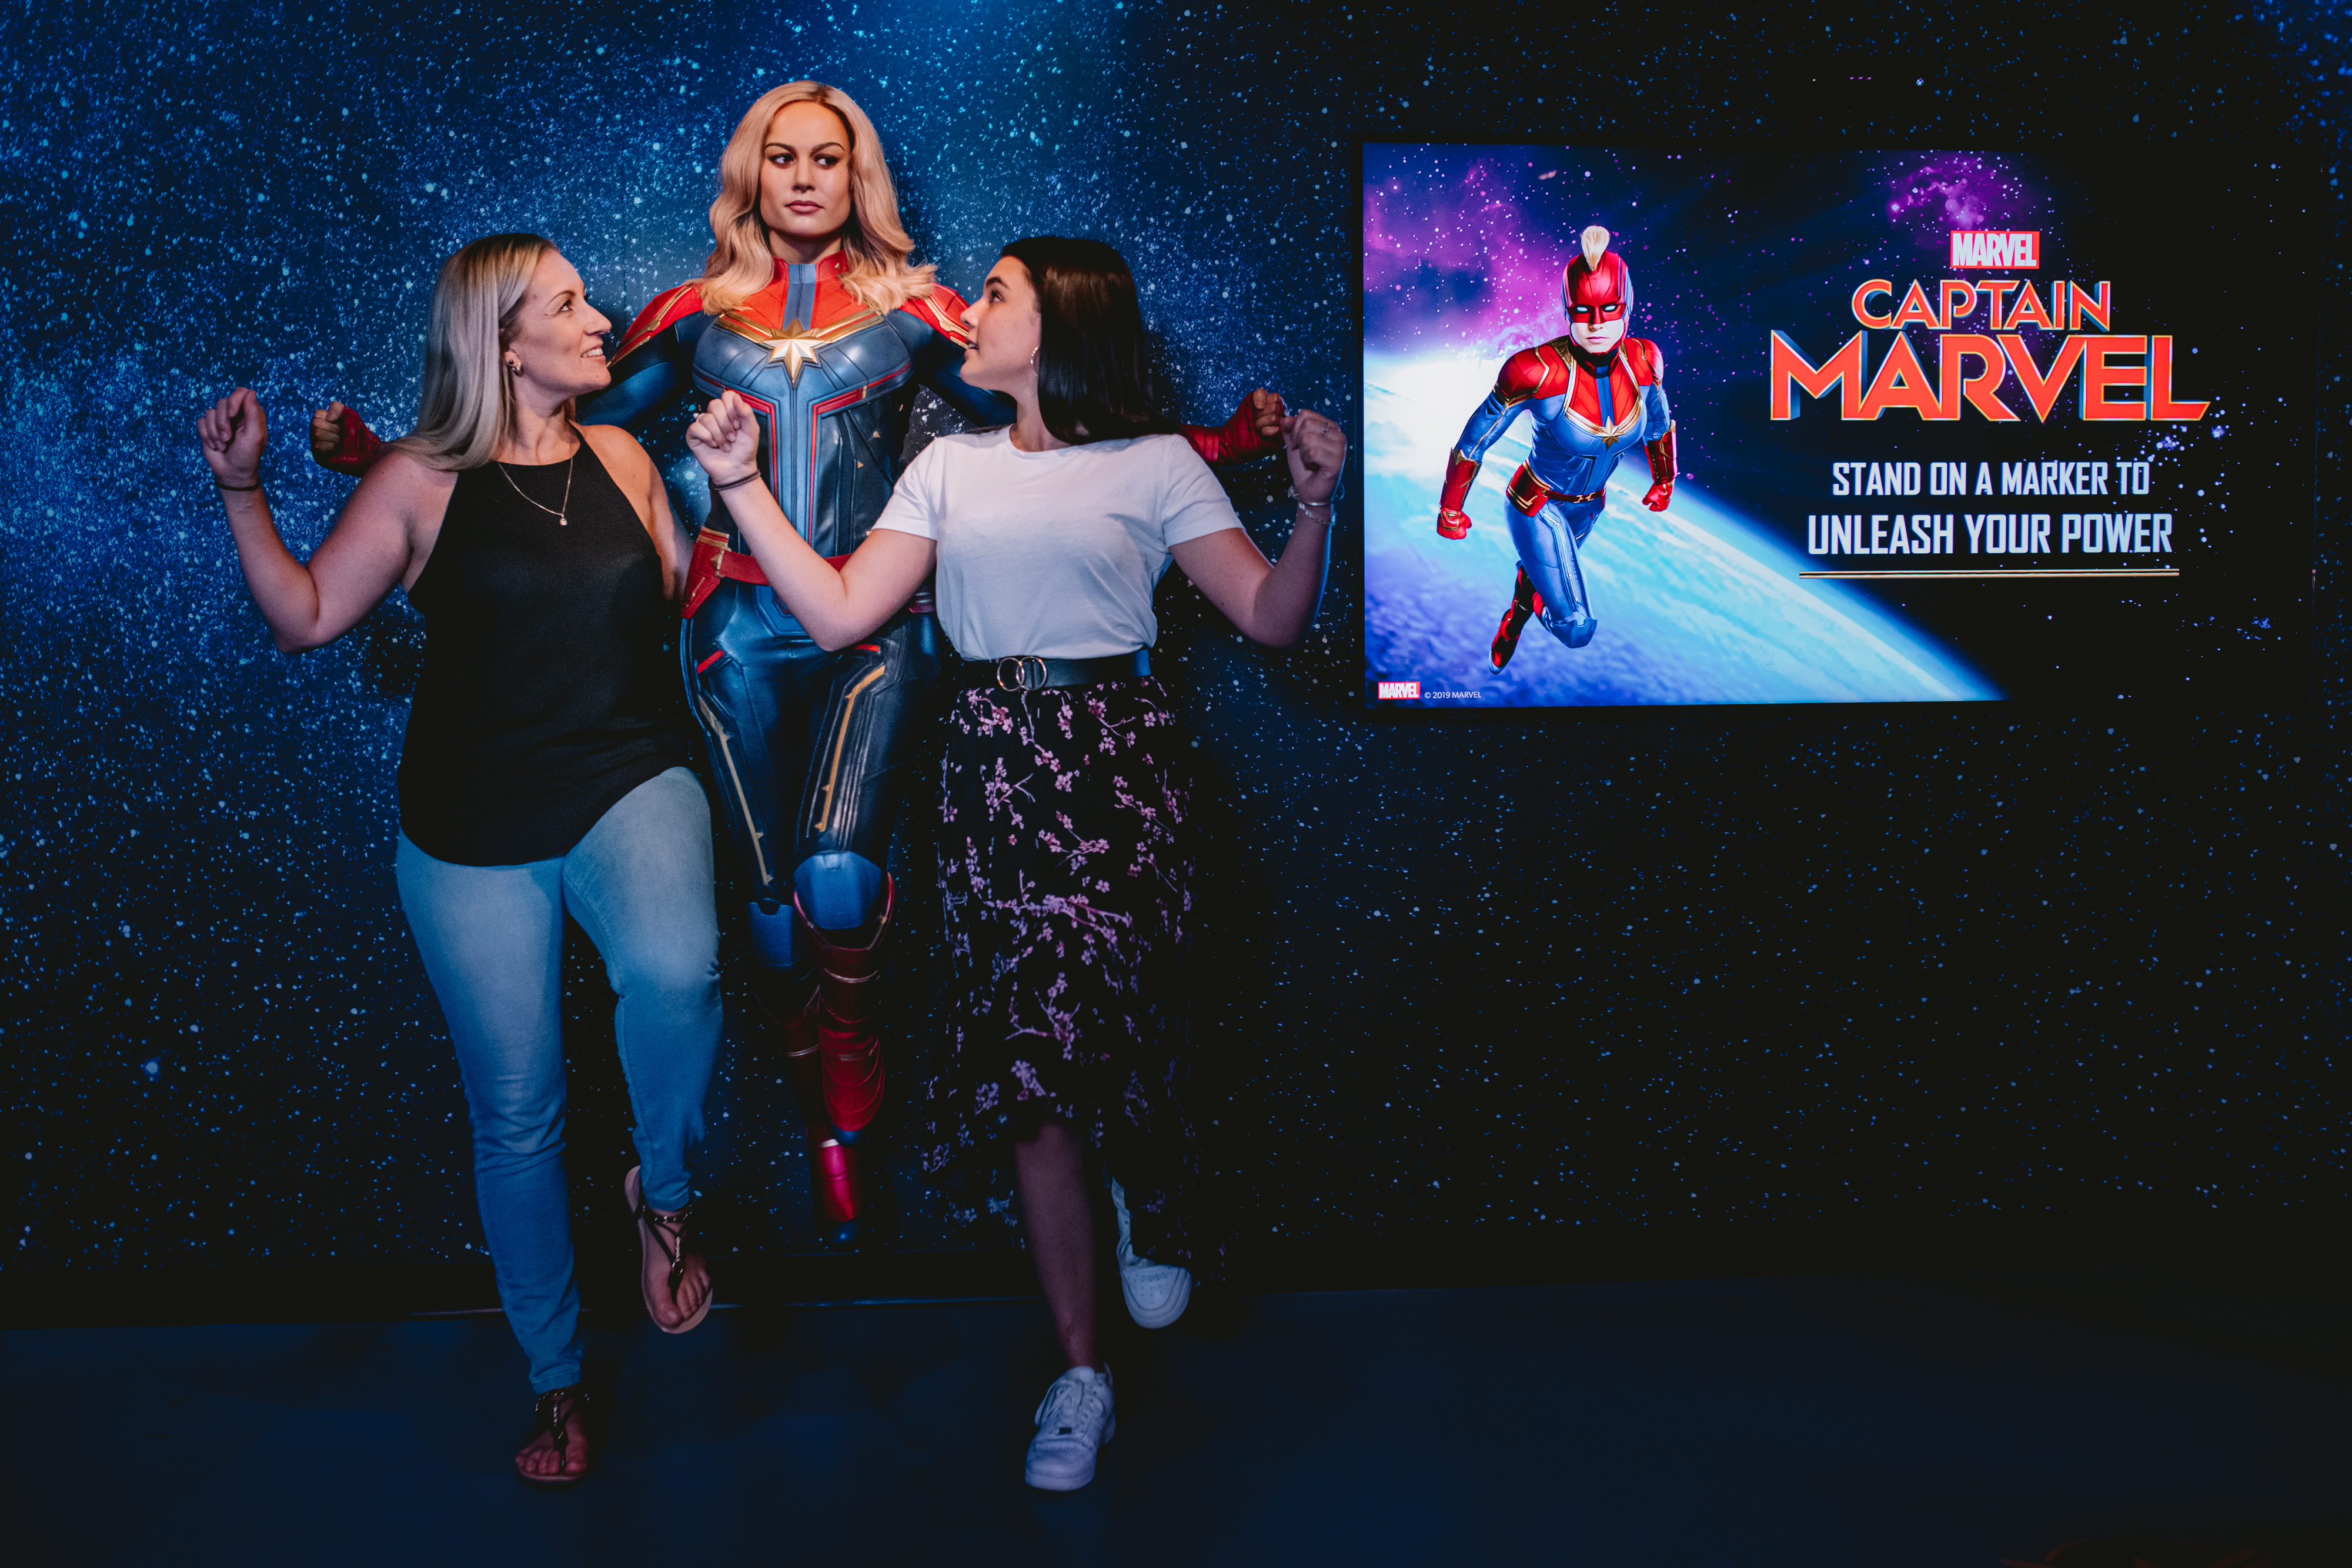 Madame Tussauds Sydney Guests Posing With Captain Marvel